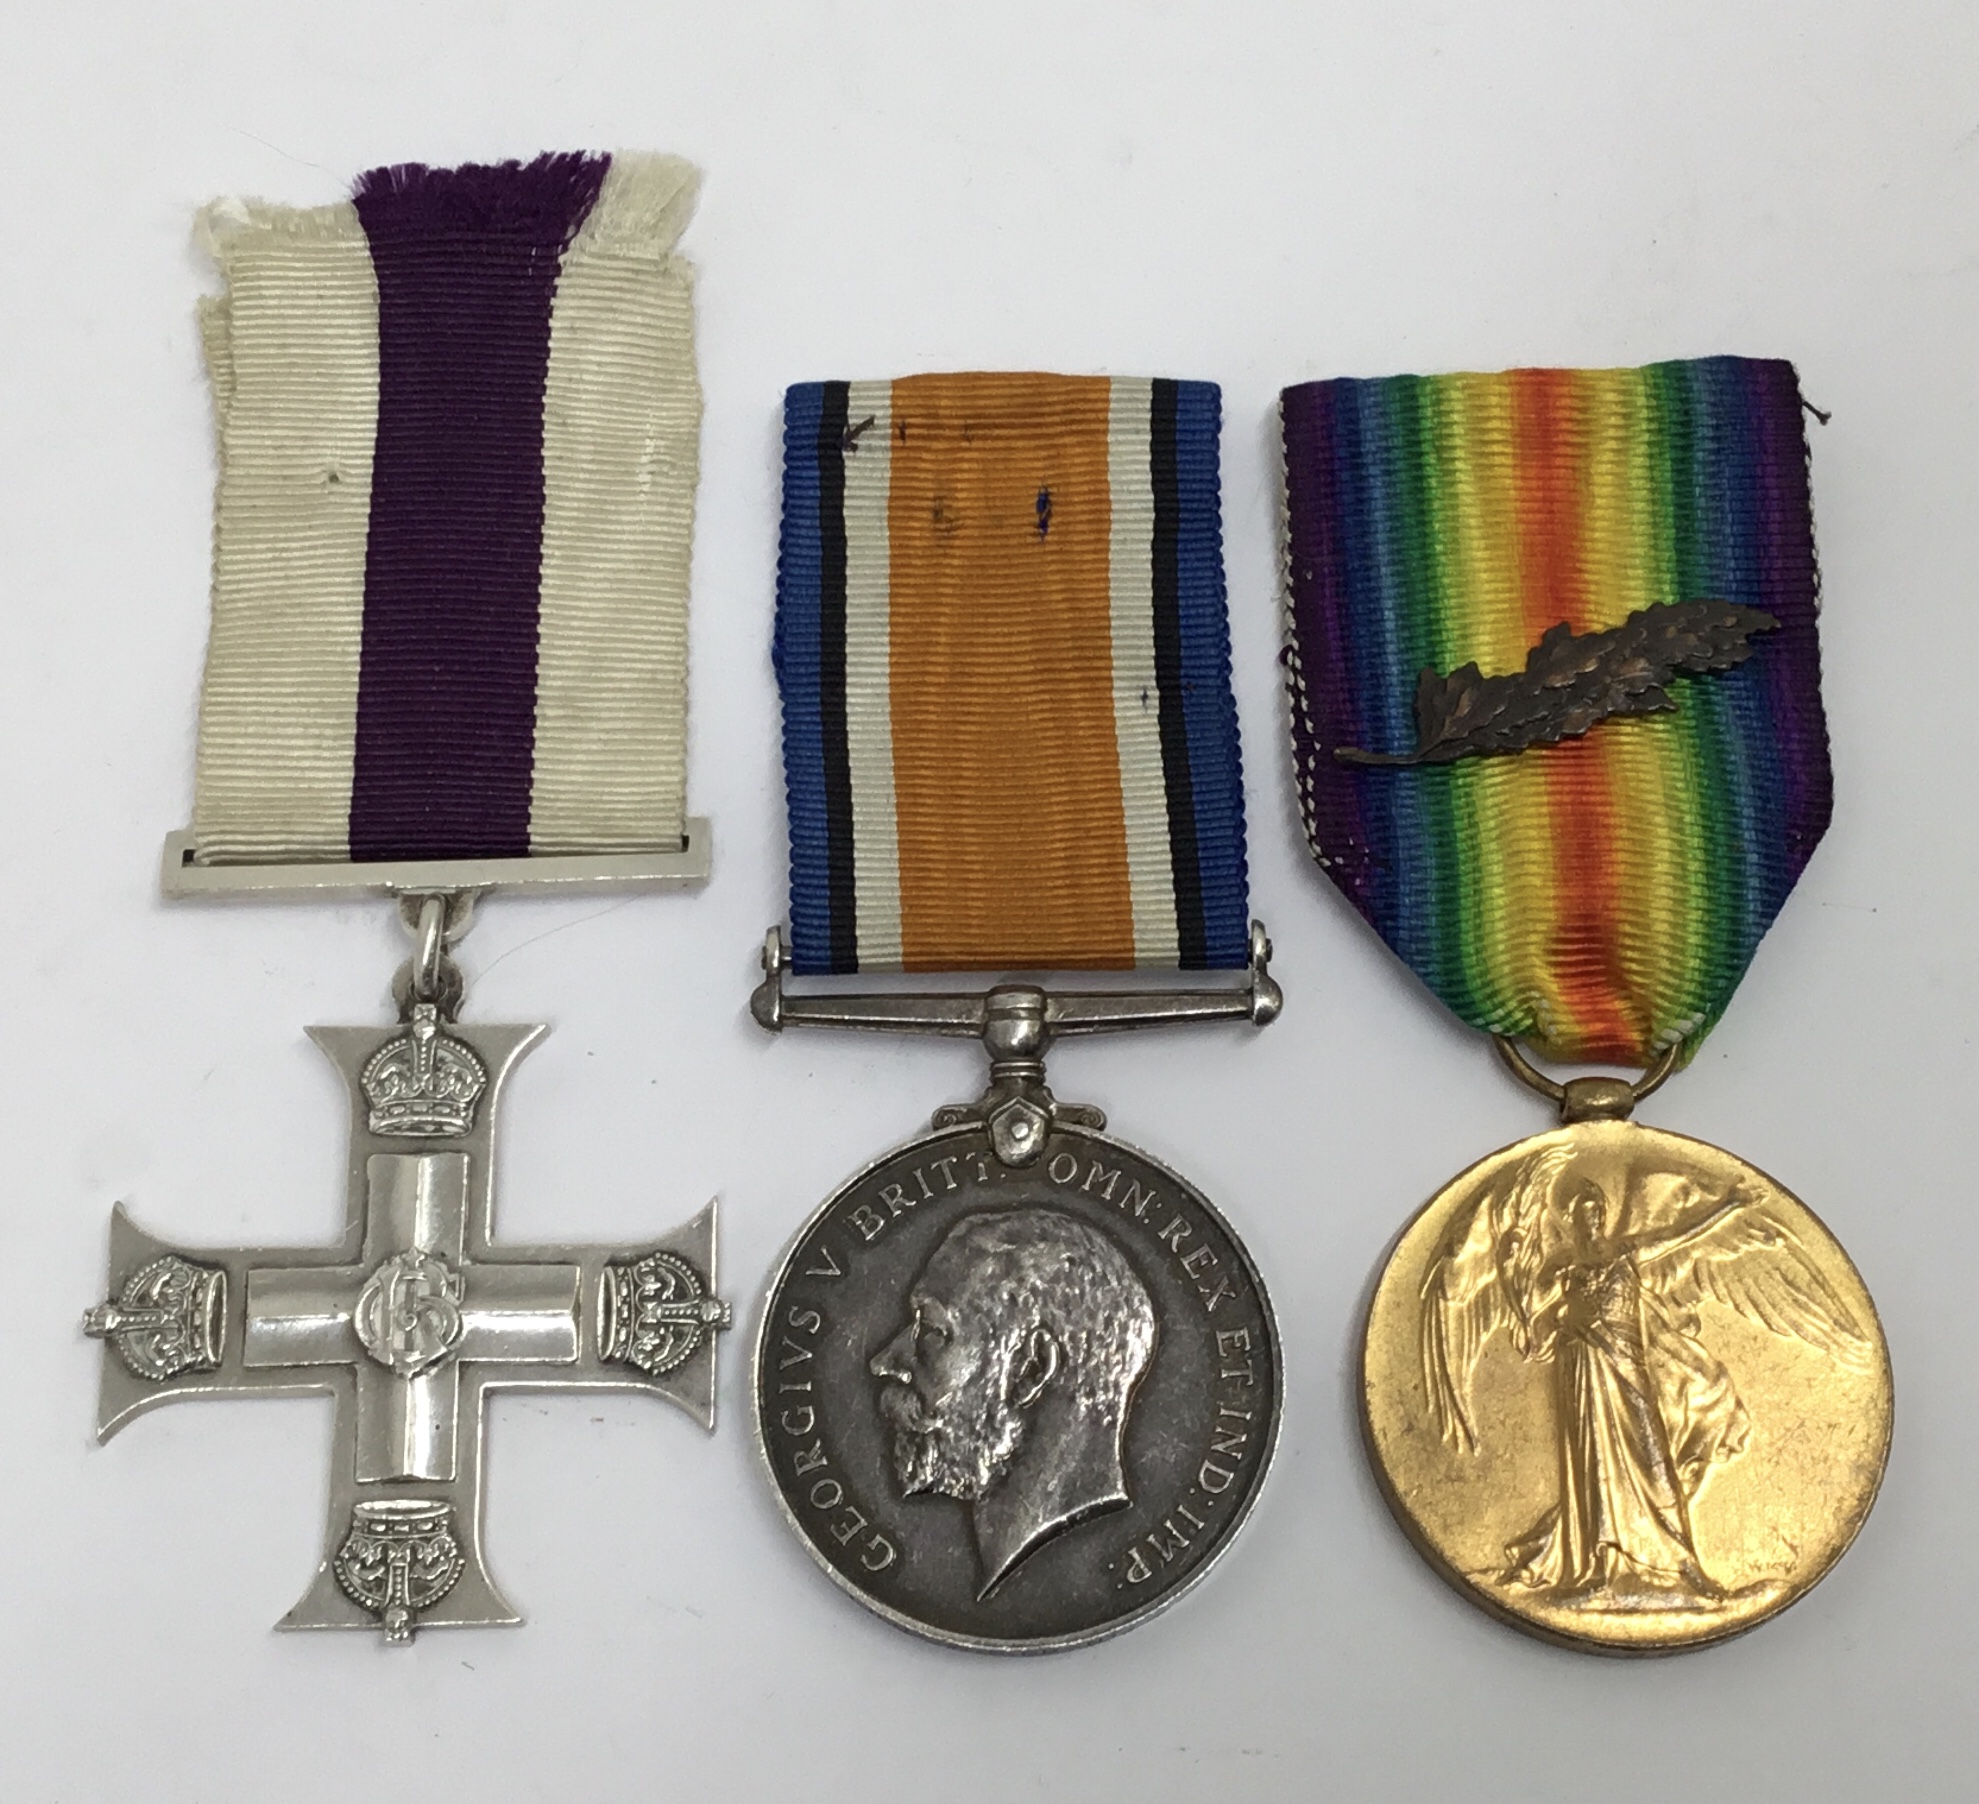 A WW1 Military Cross / Mentioned in Dispatches medal group, awarded to Lt W.G. Grant. To include: